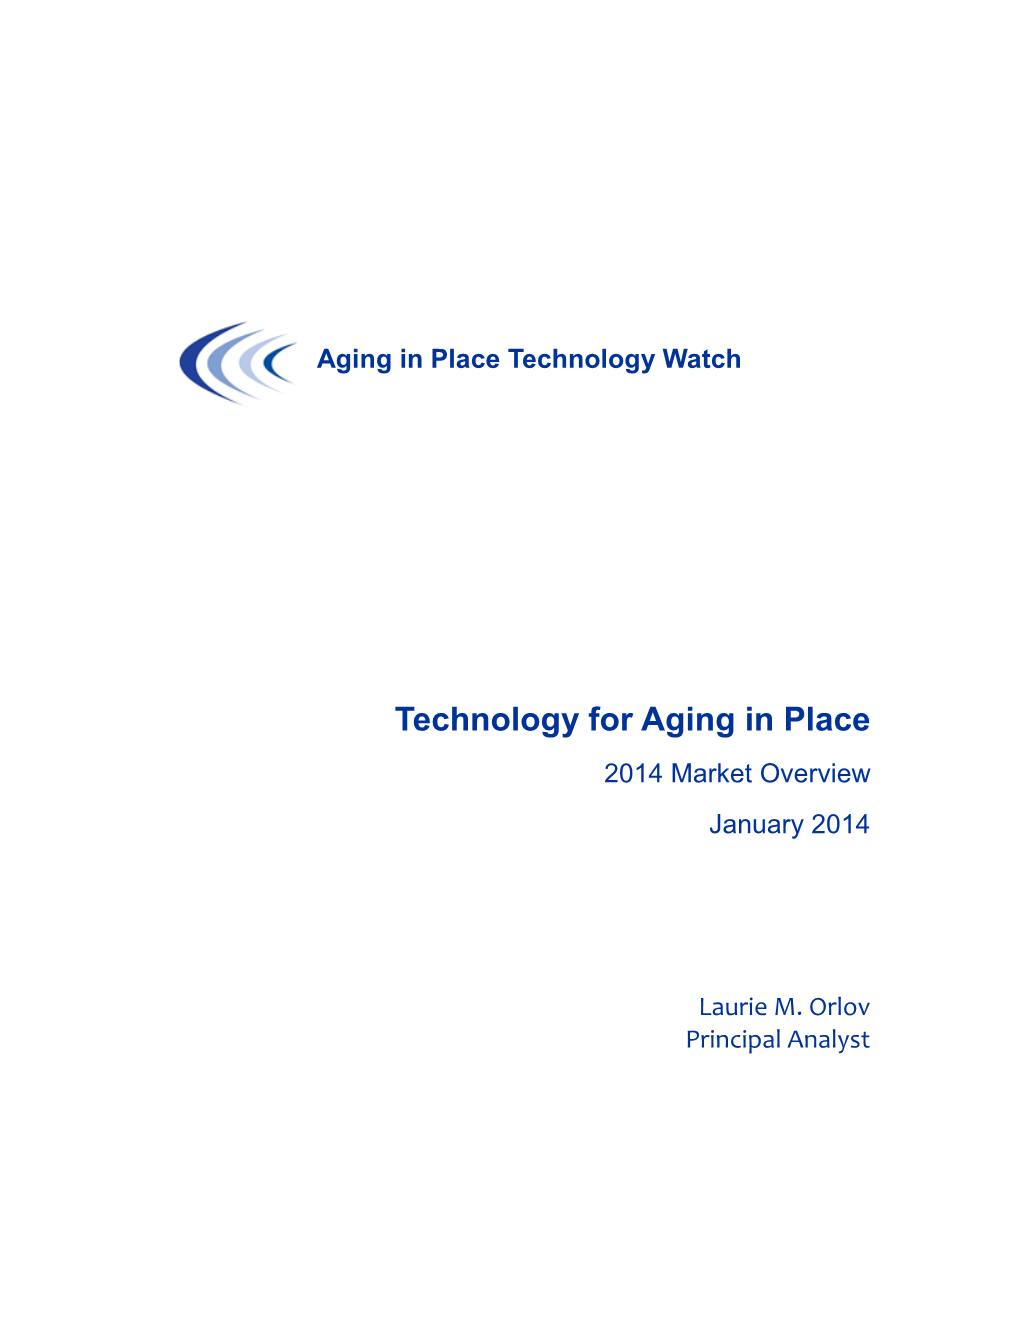 Technology for Aging in Place Market Overview